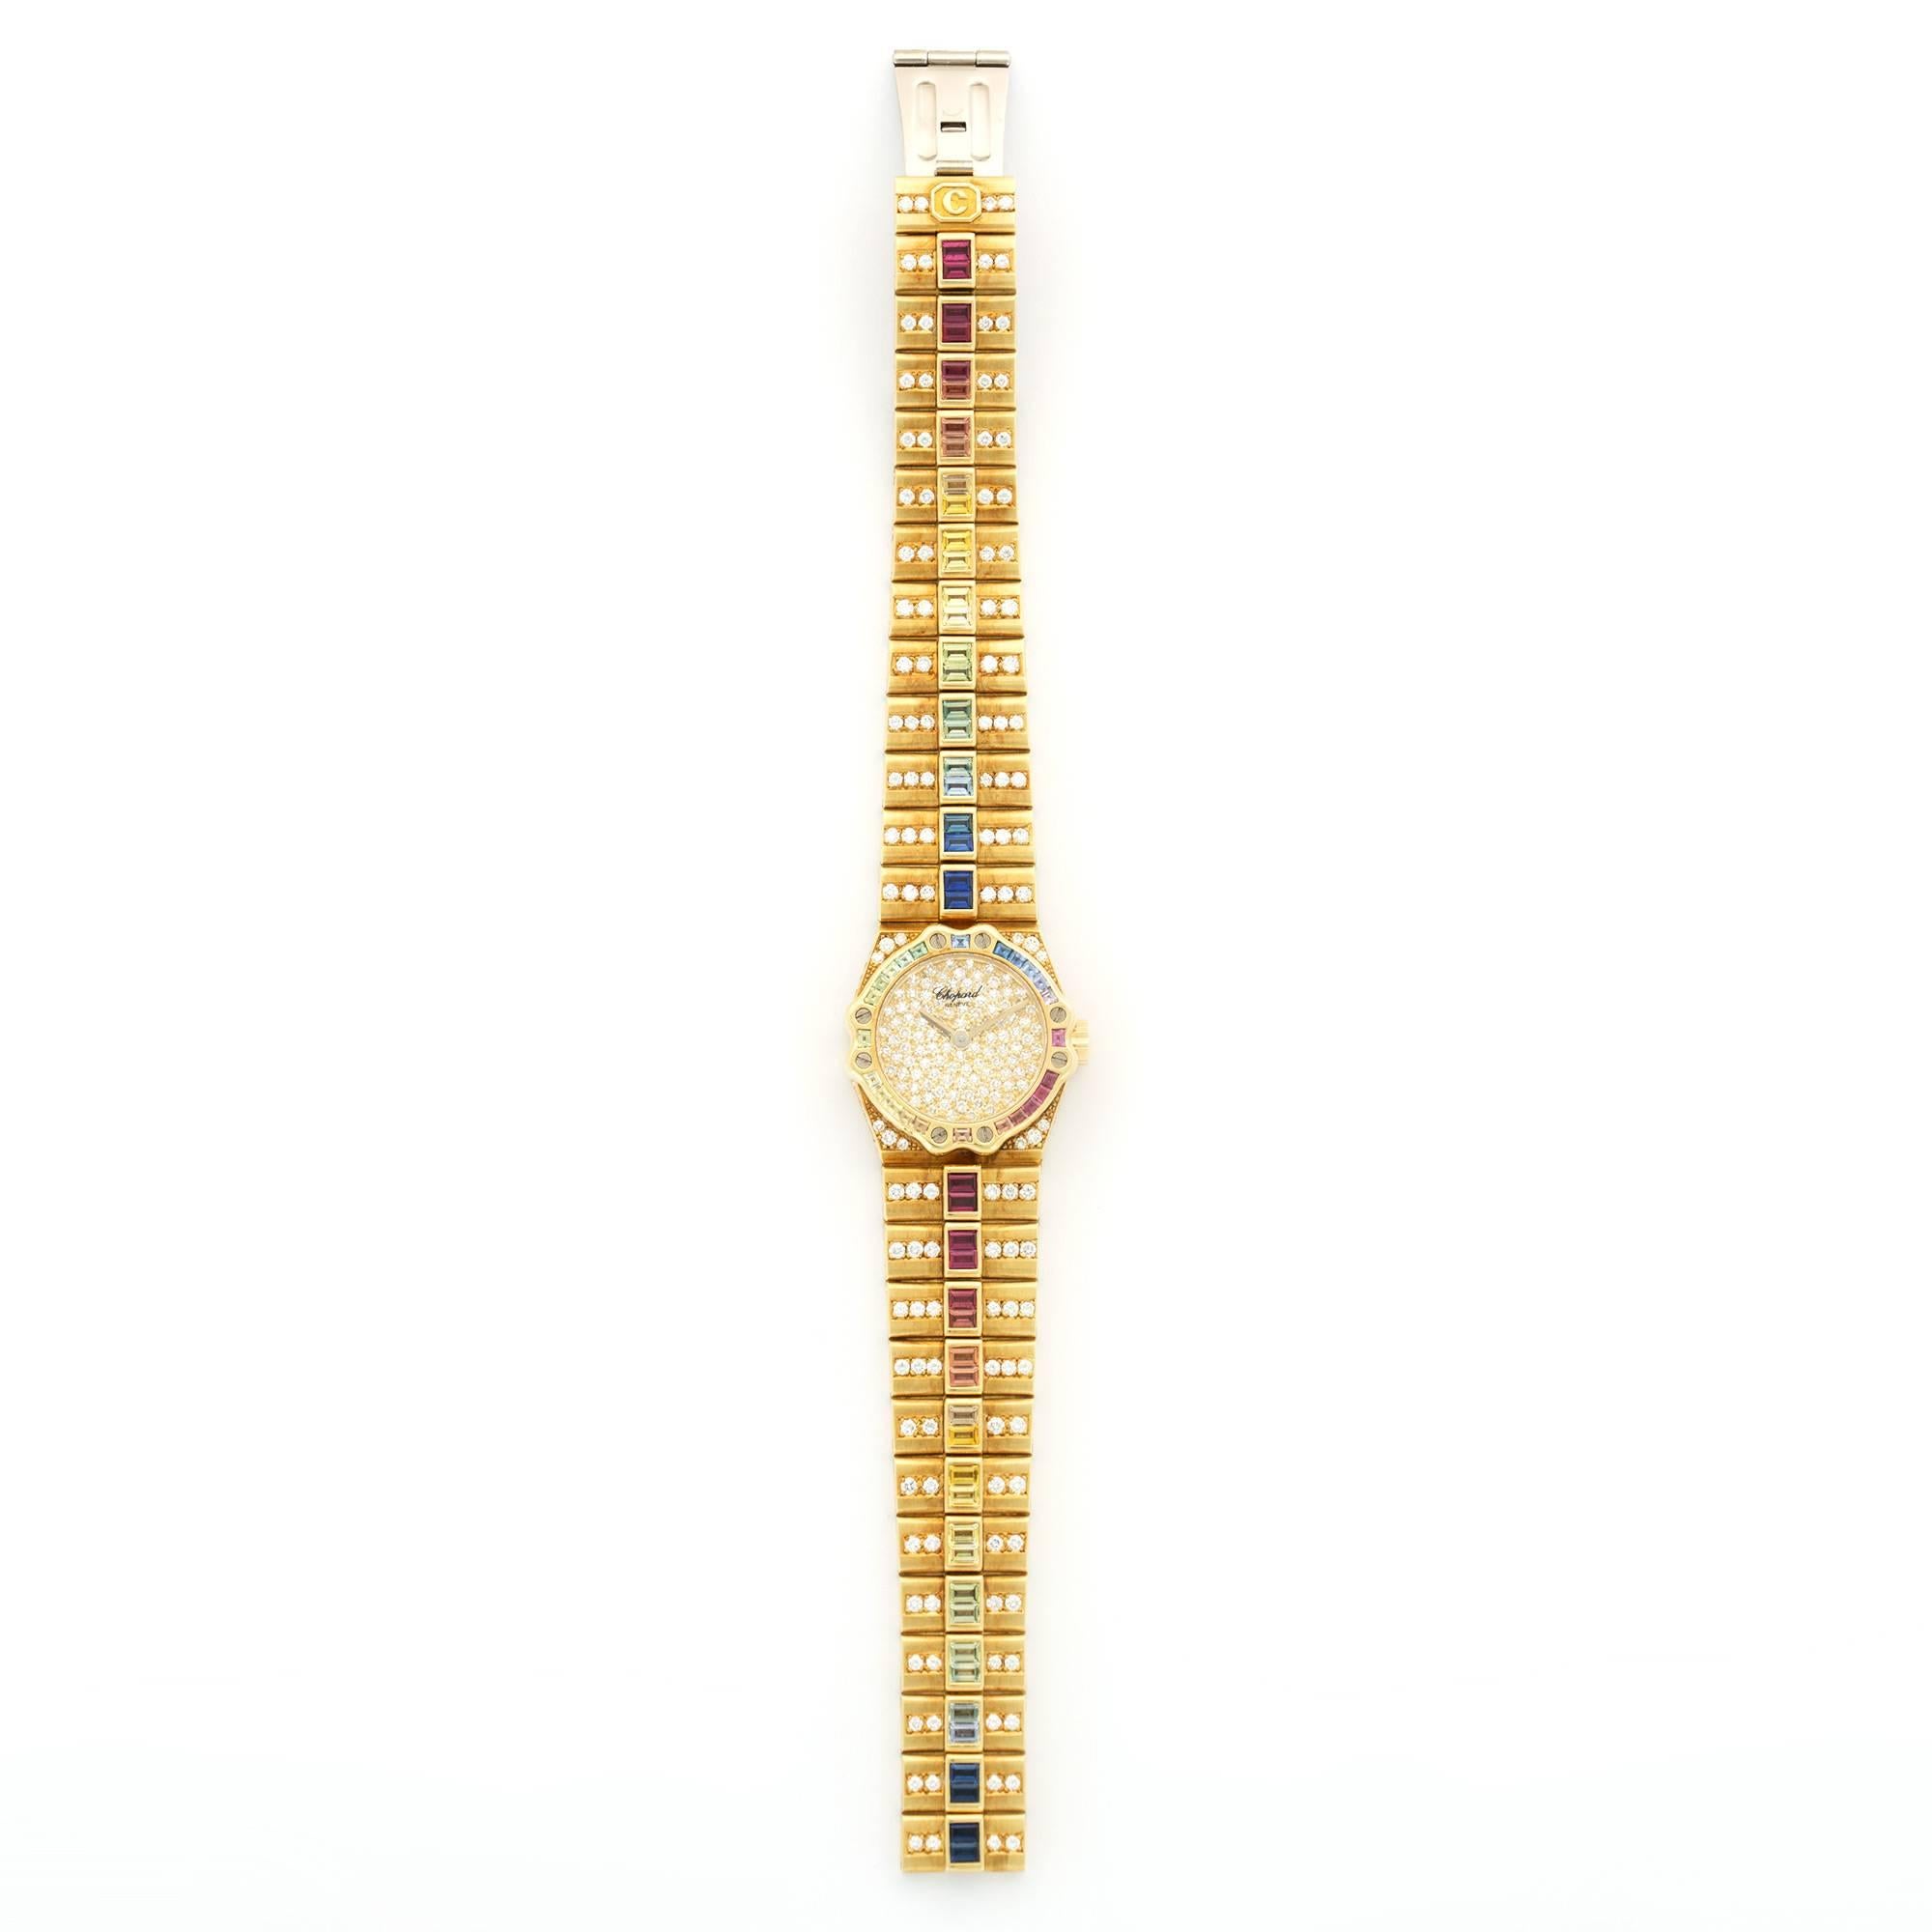 An 18k Yellow Gold St. Moritz Wristwatch by Chopard. All Original Pave Diamonds with Multi-Color Rainbow Sapphires. Circa 1990's. 24.5mm Case Diameter. 